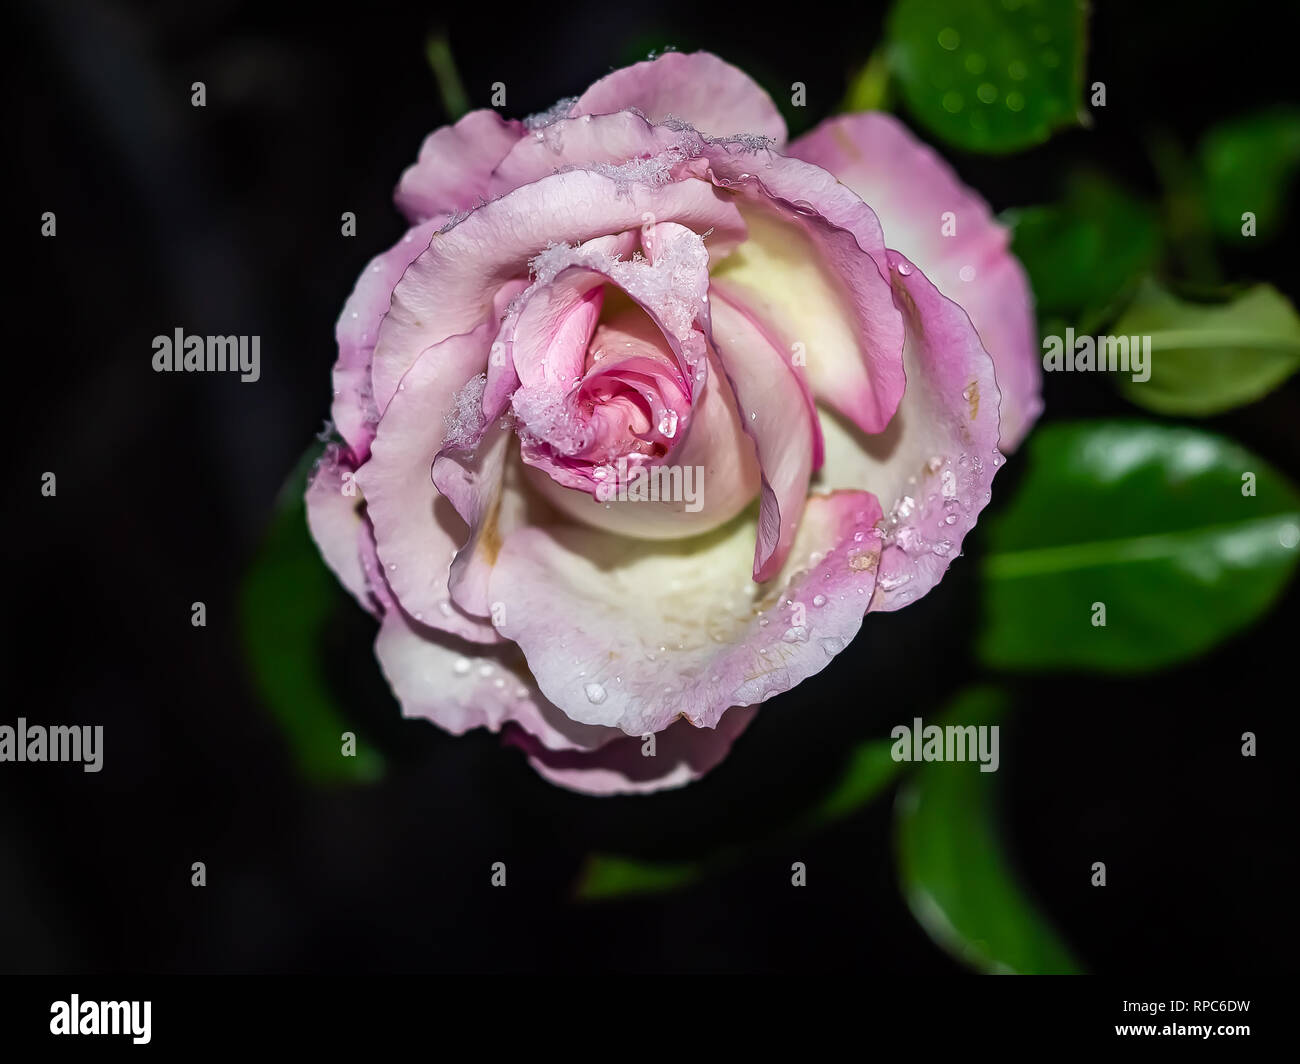 Snow and ice collect on a blooming rose during a light February snow in Kanagawa, Japan Stock Photo